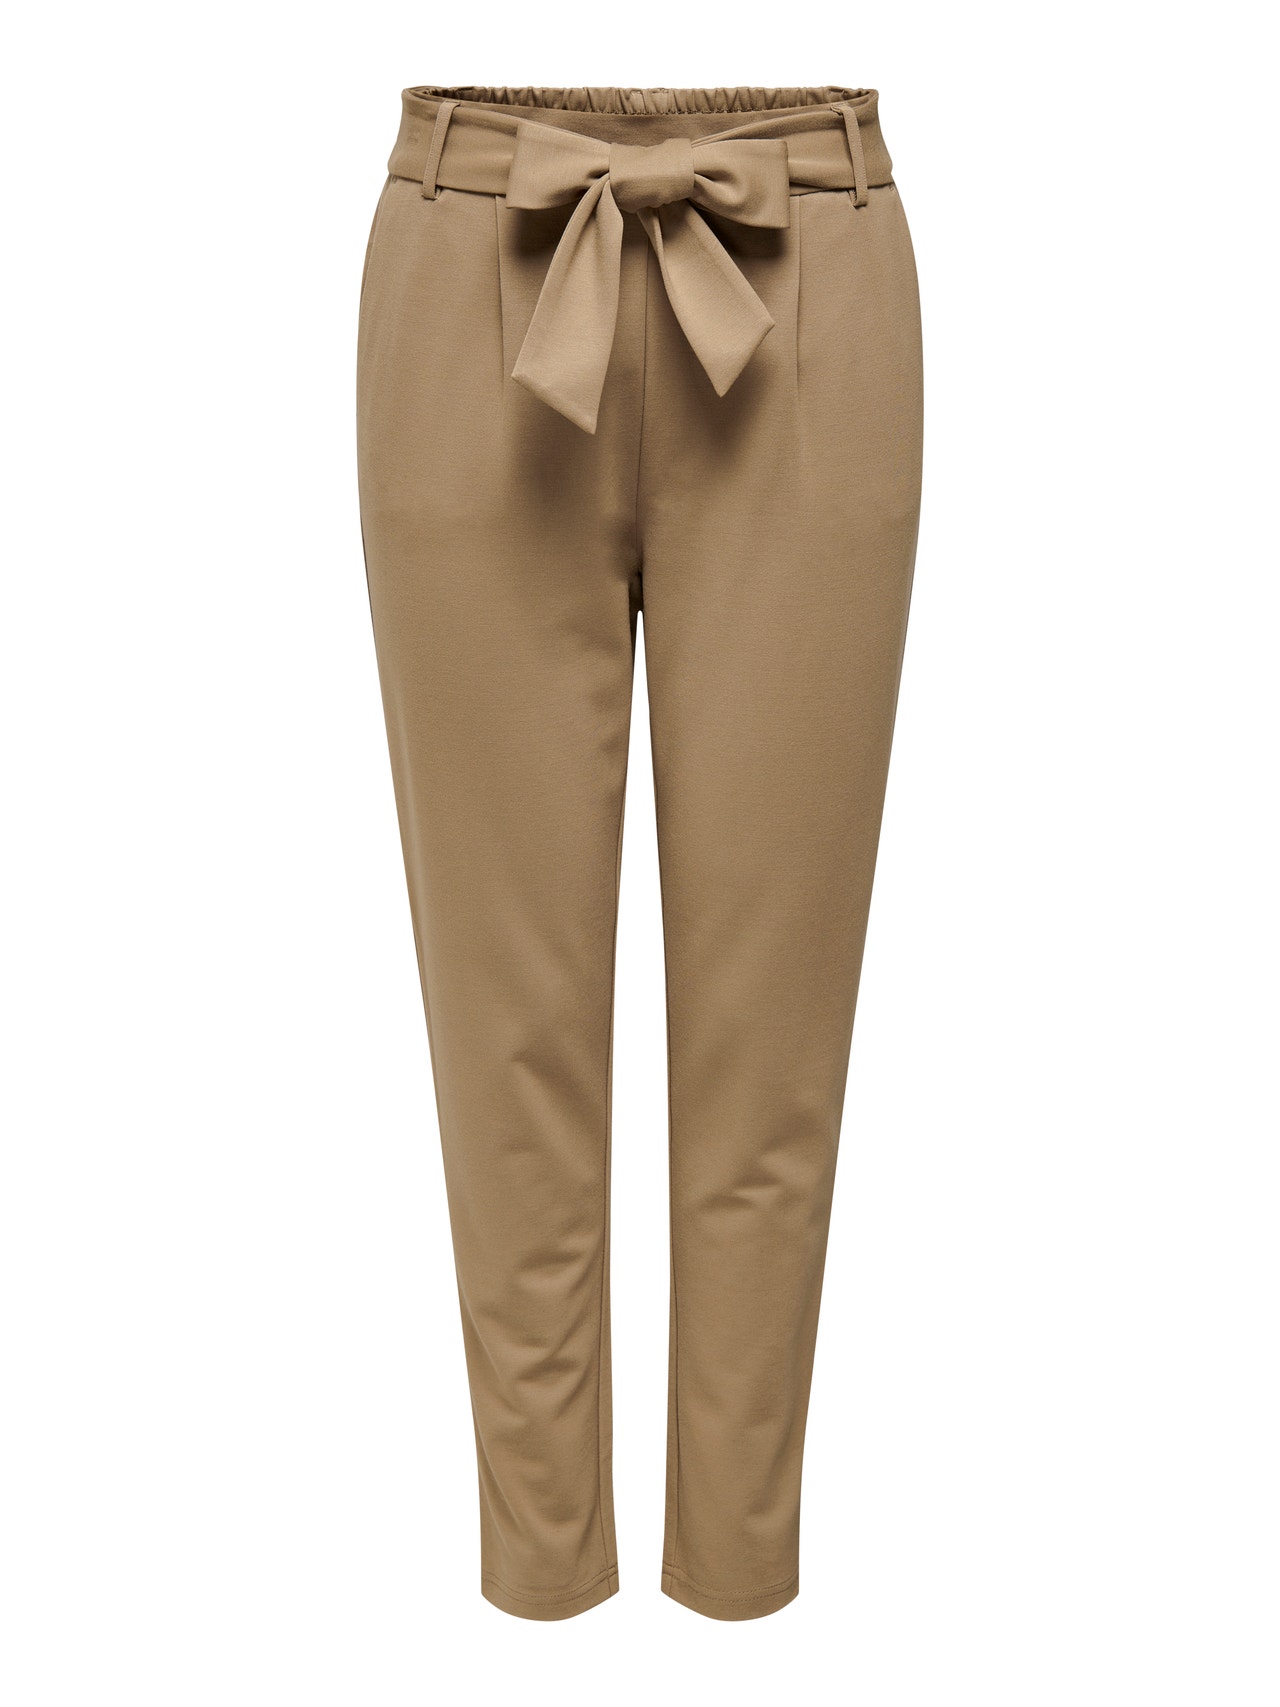 ONLY Regular Fit Trousers -Tigers Eye - 15228796